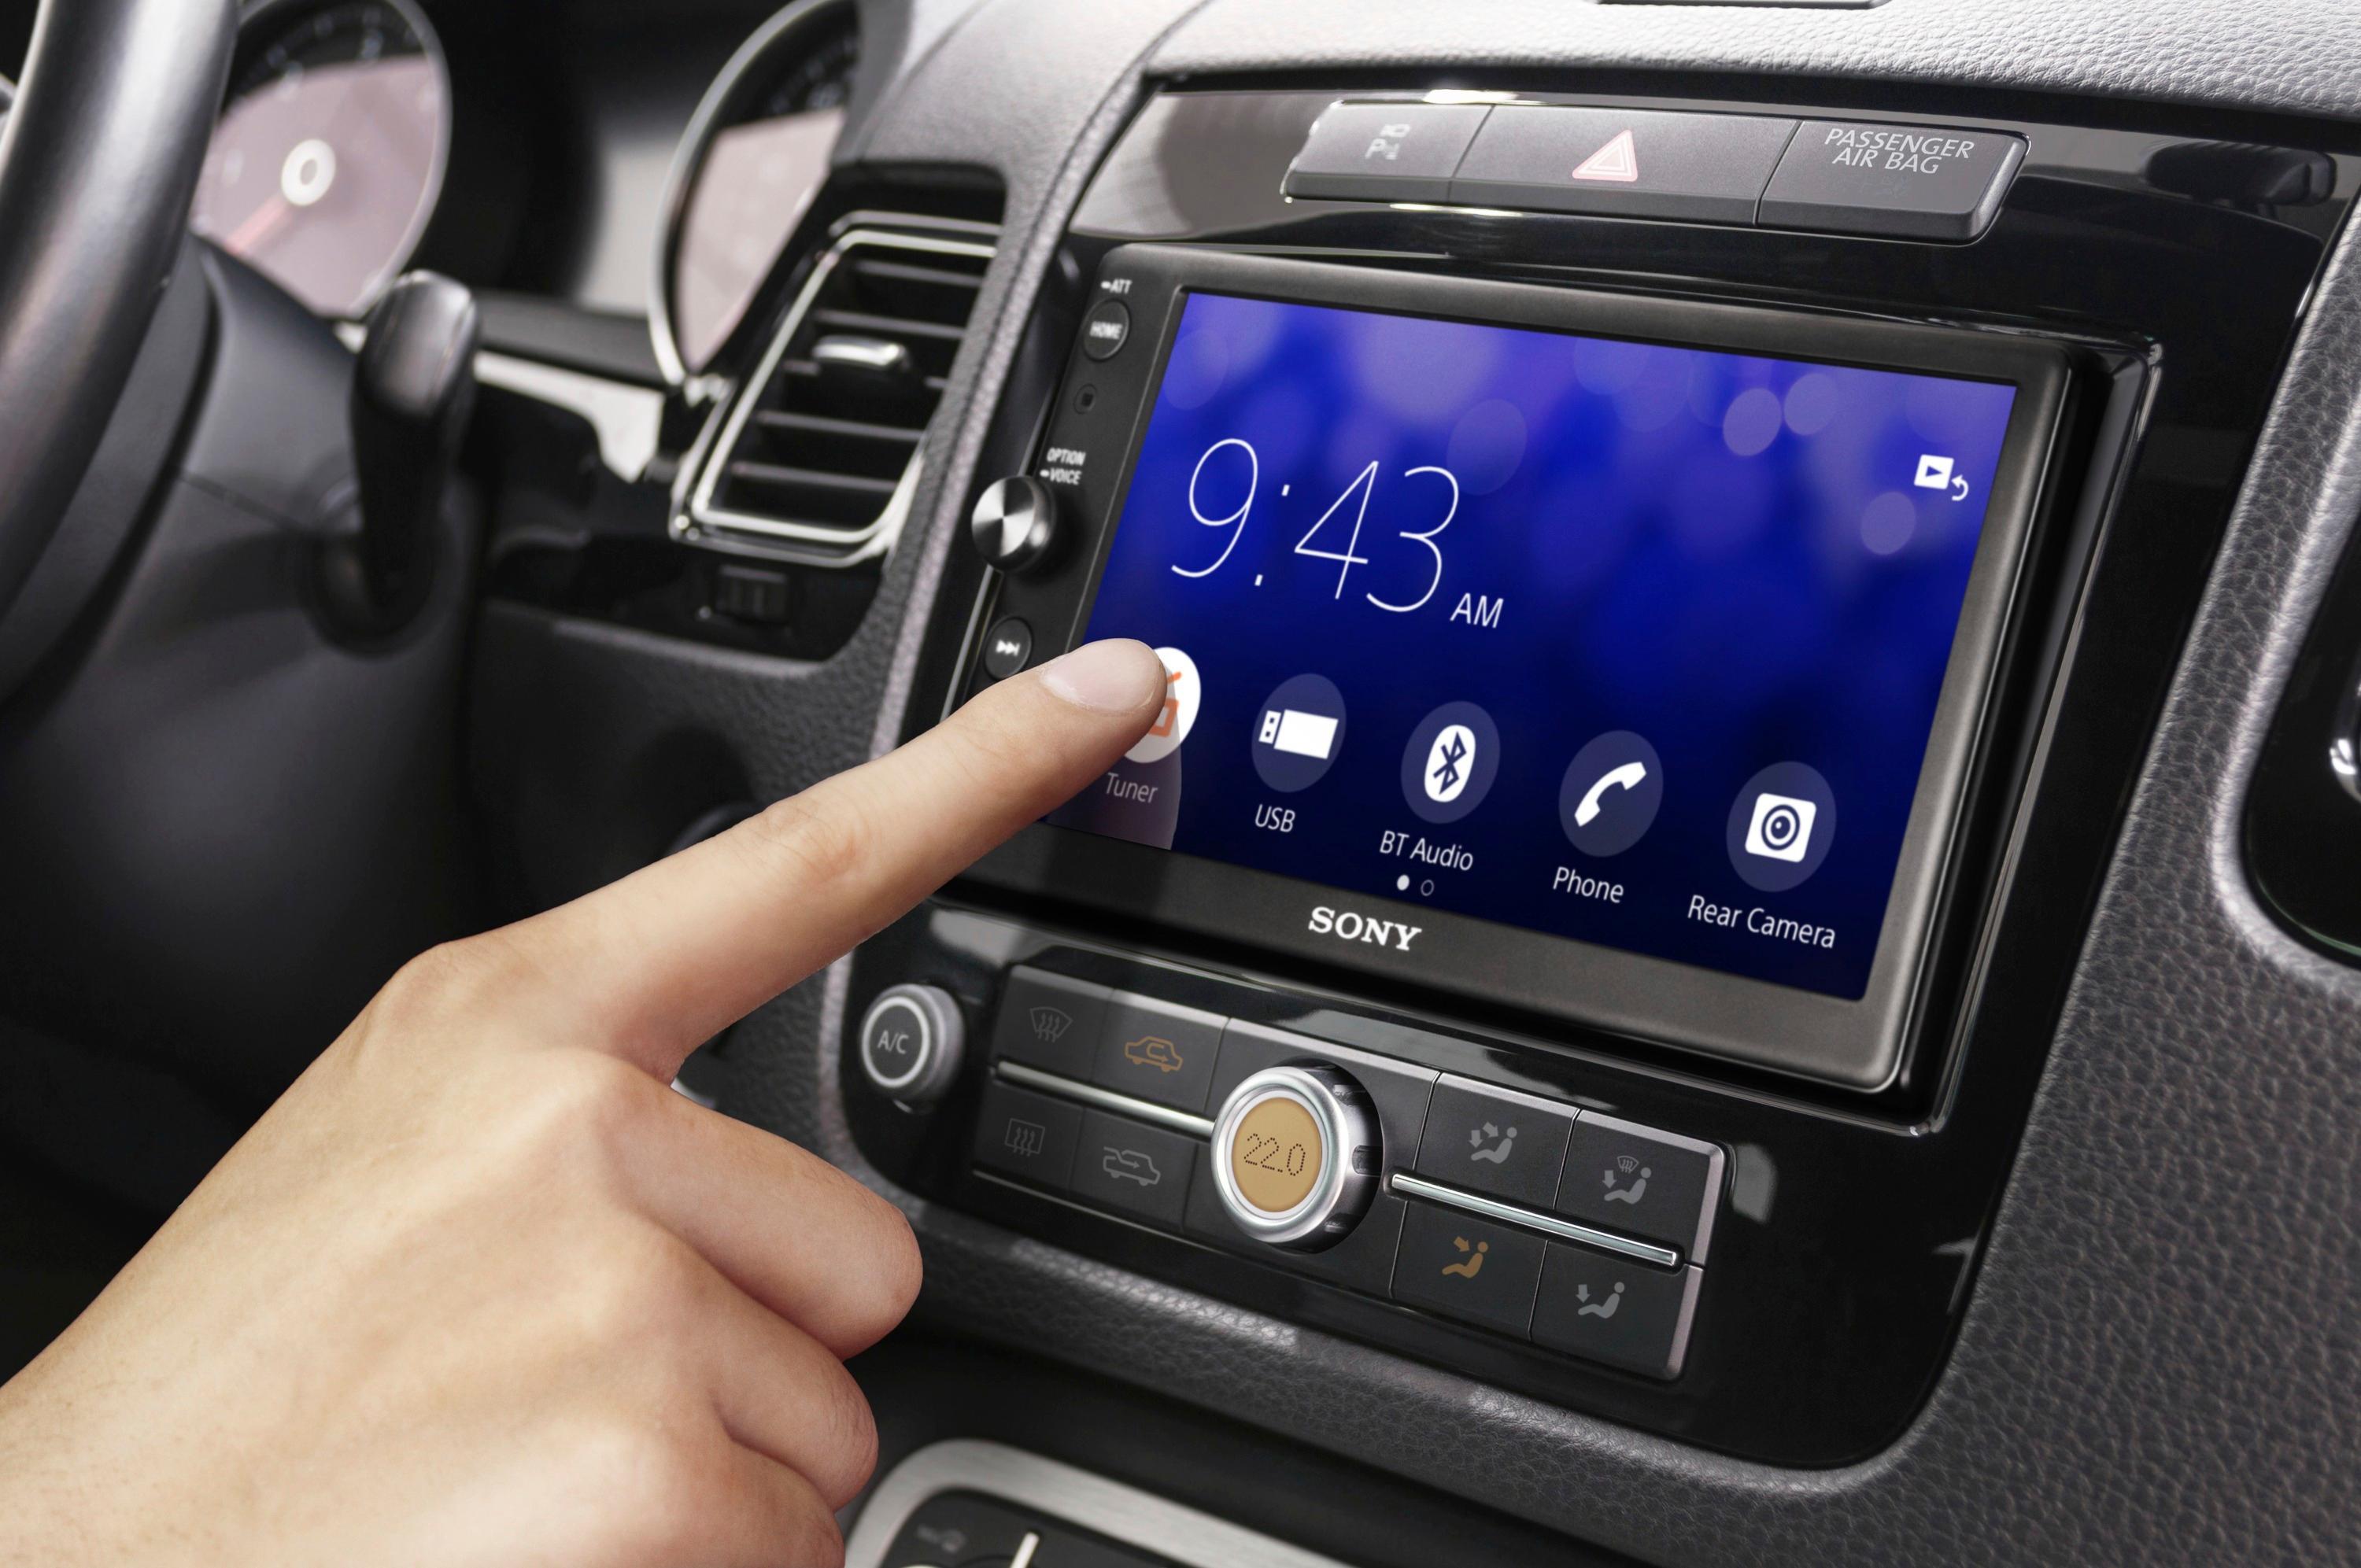 Is Apple Carplay and Android Auto worth the extra cost?